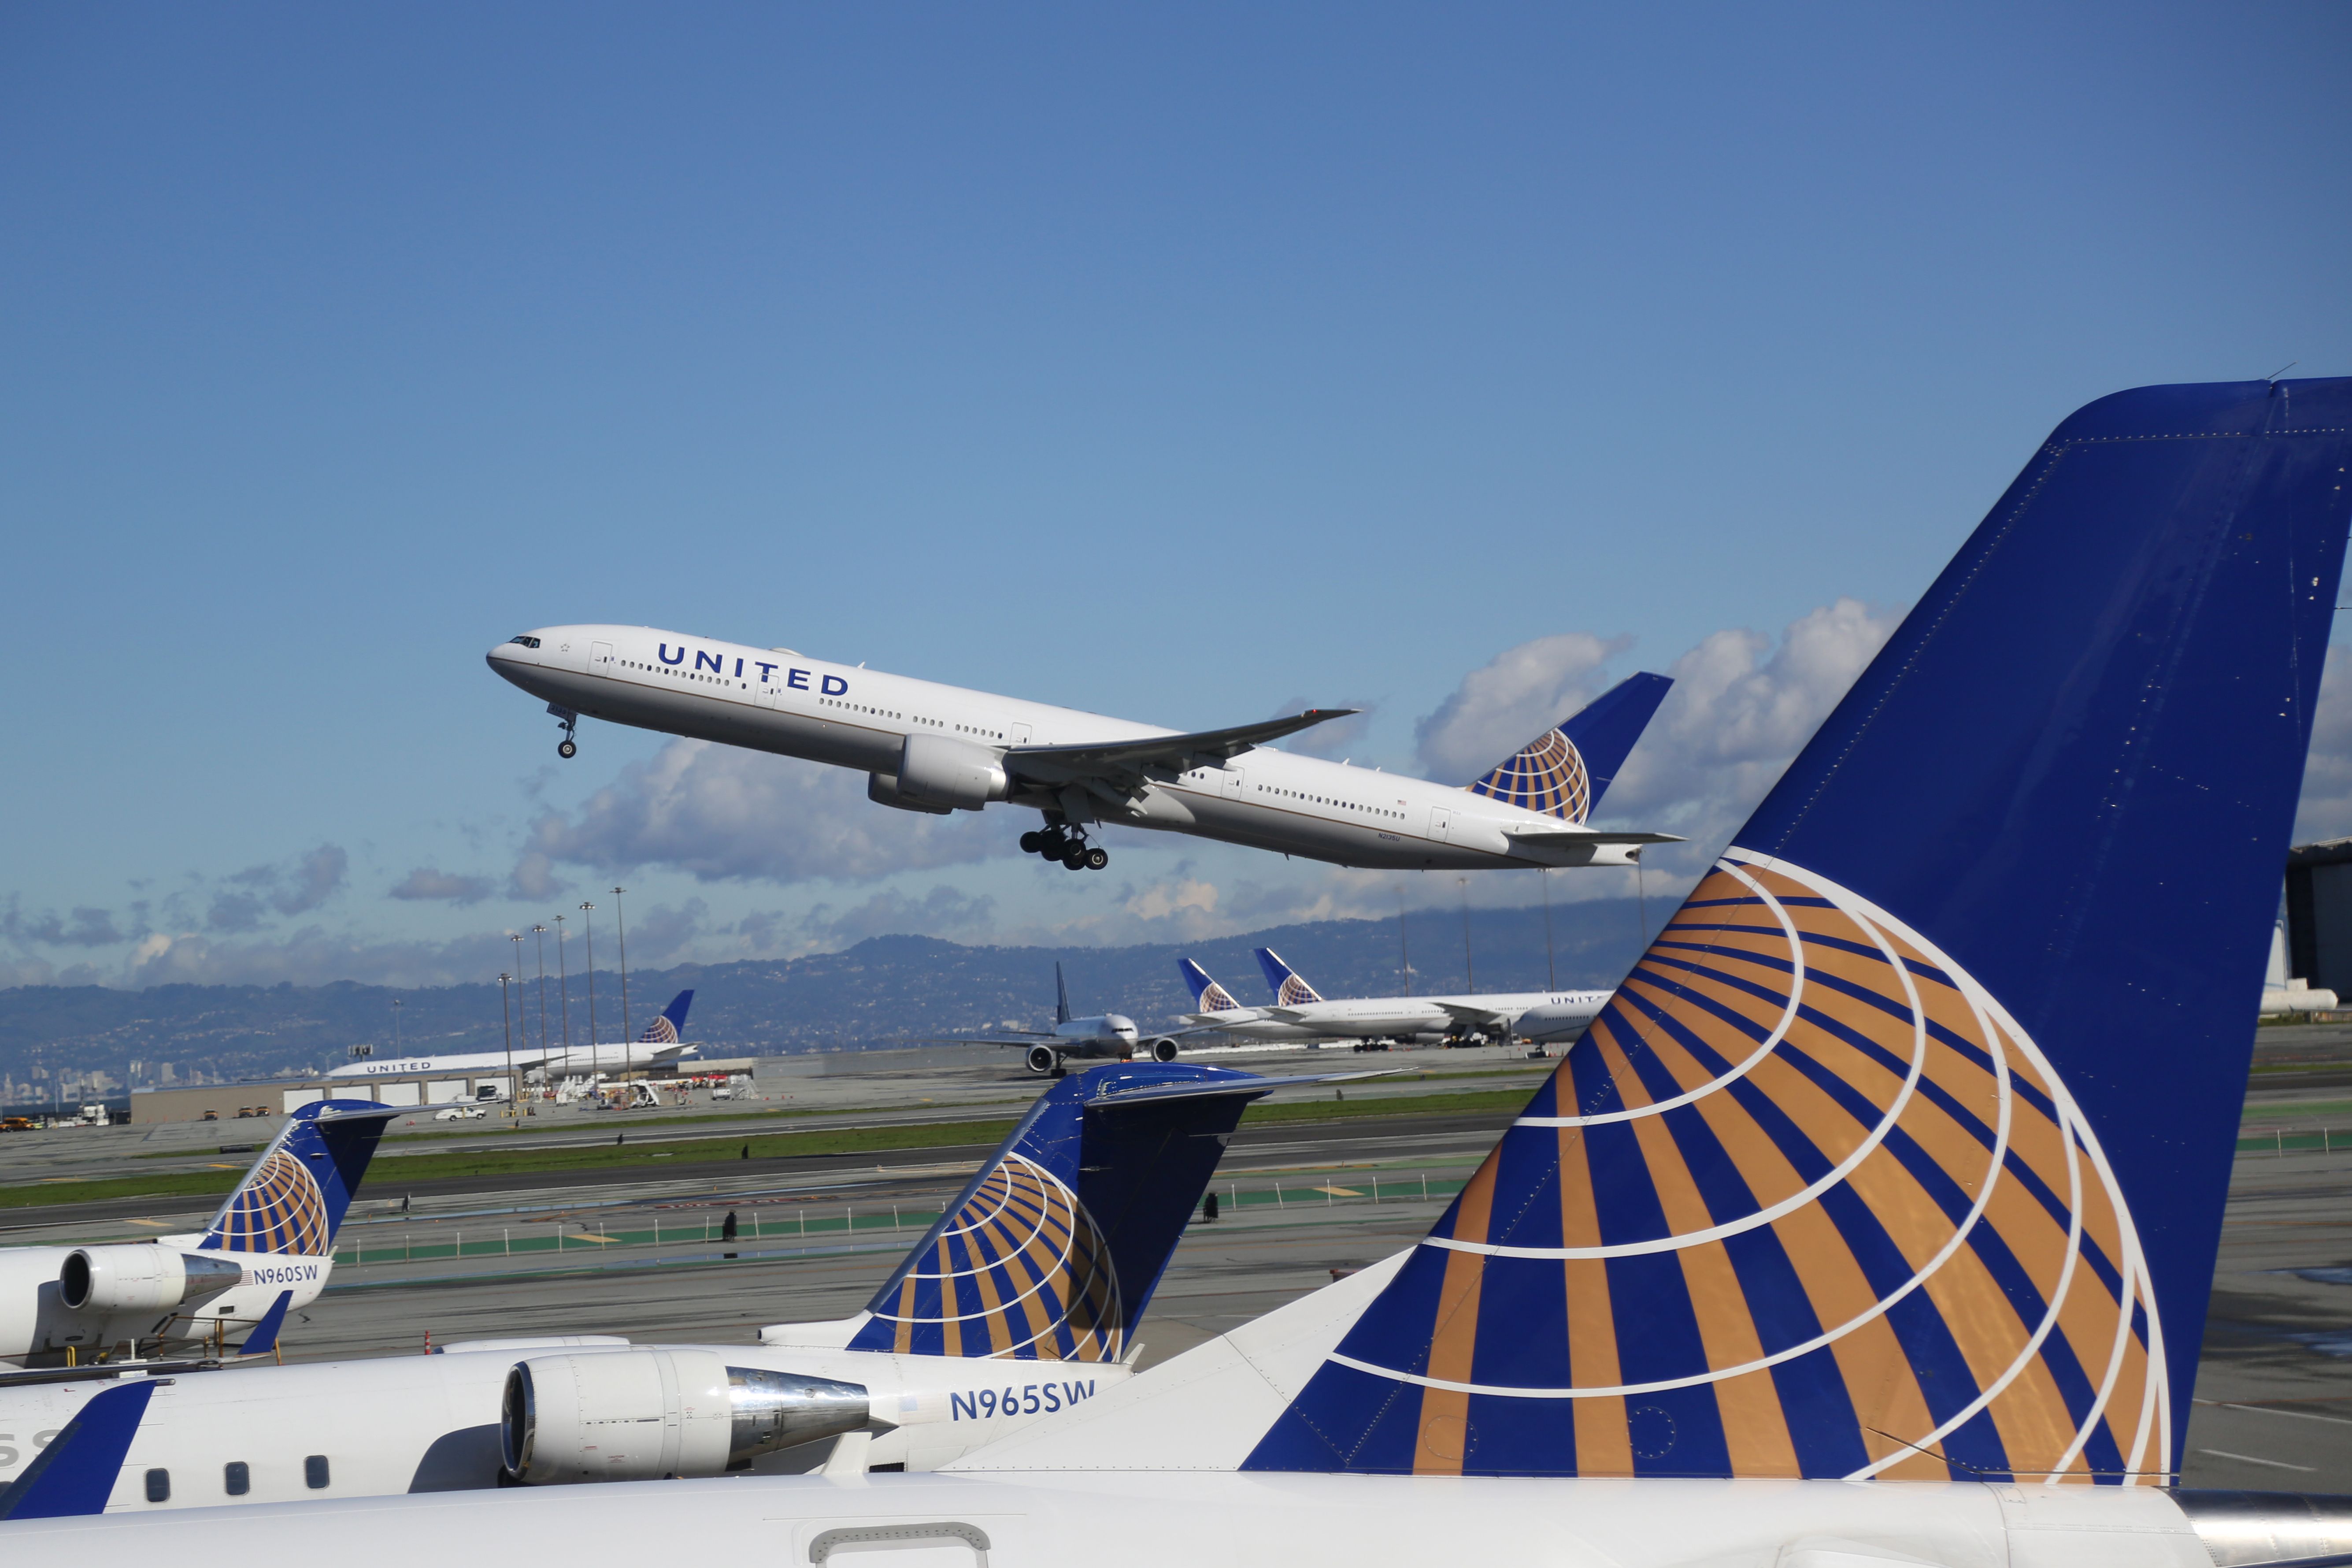 United Airlines aircraft at SFO